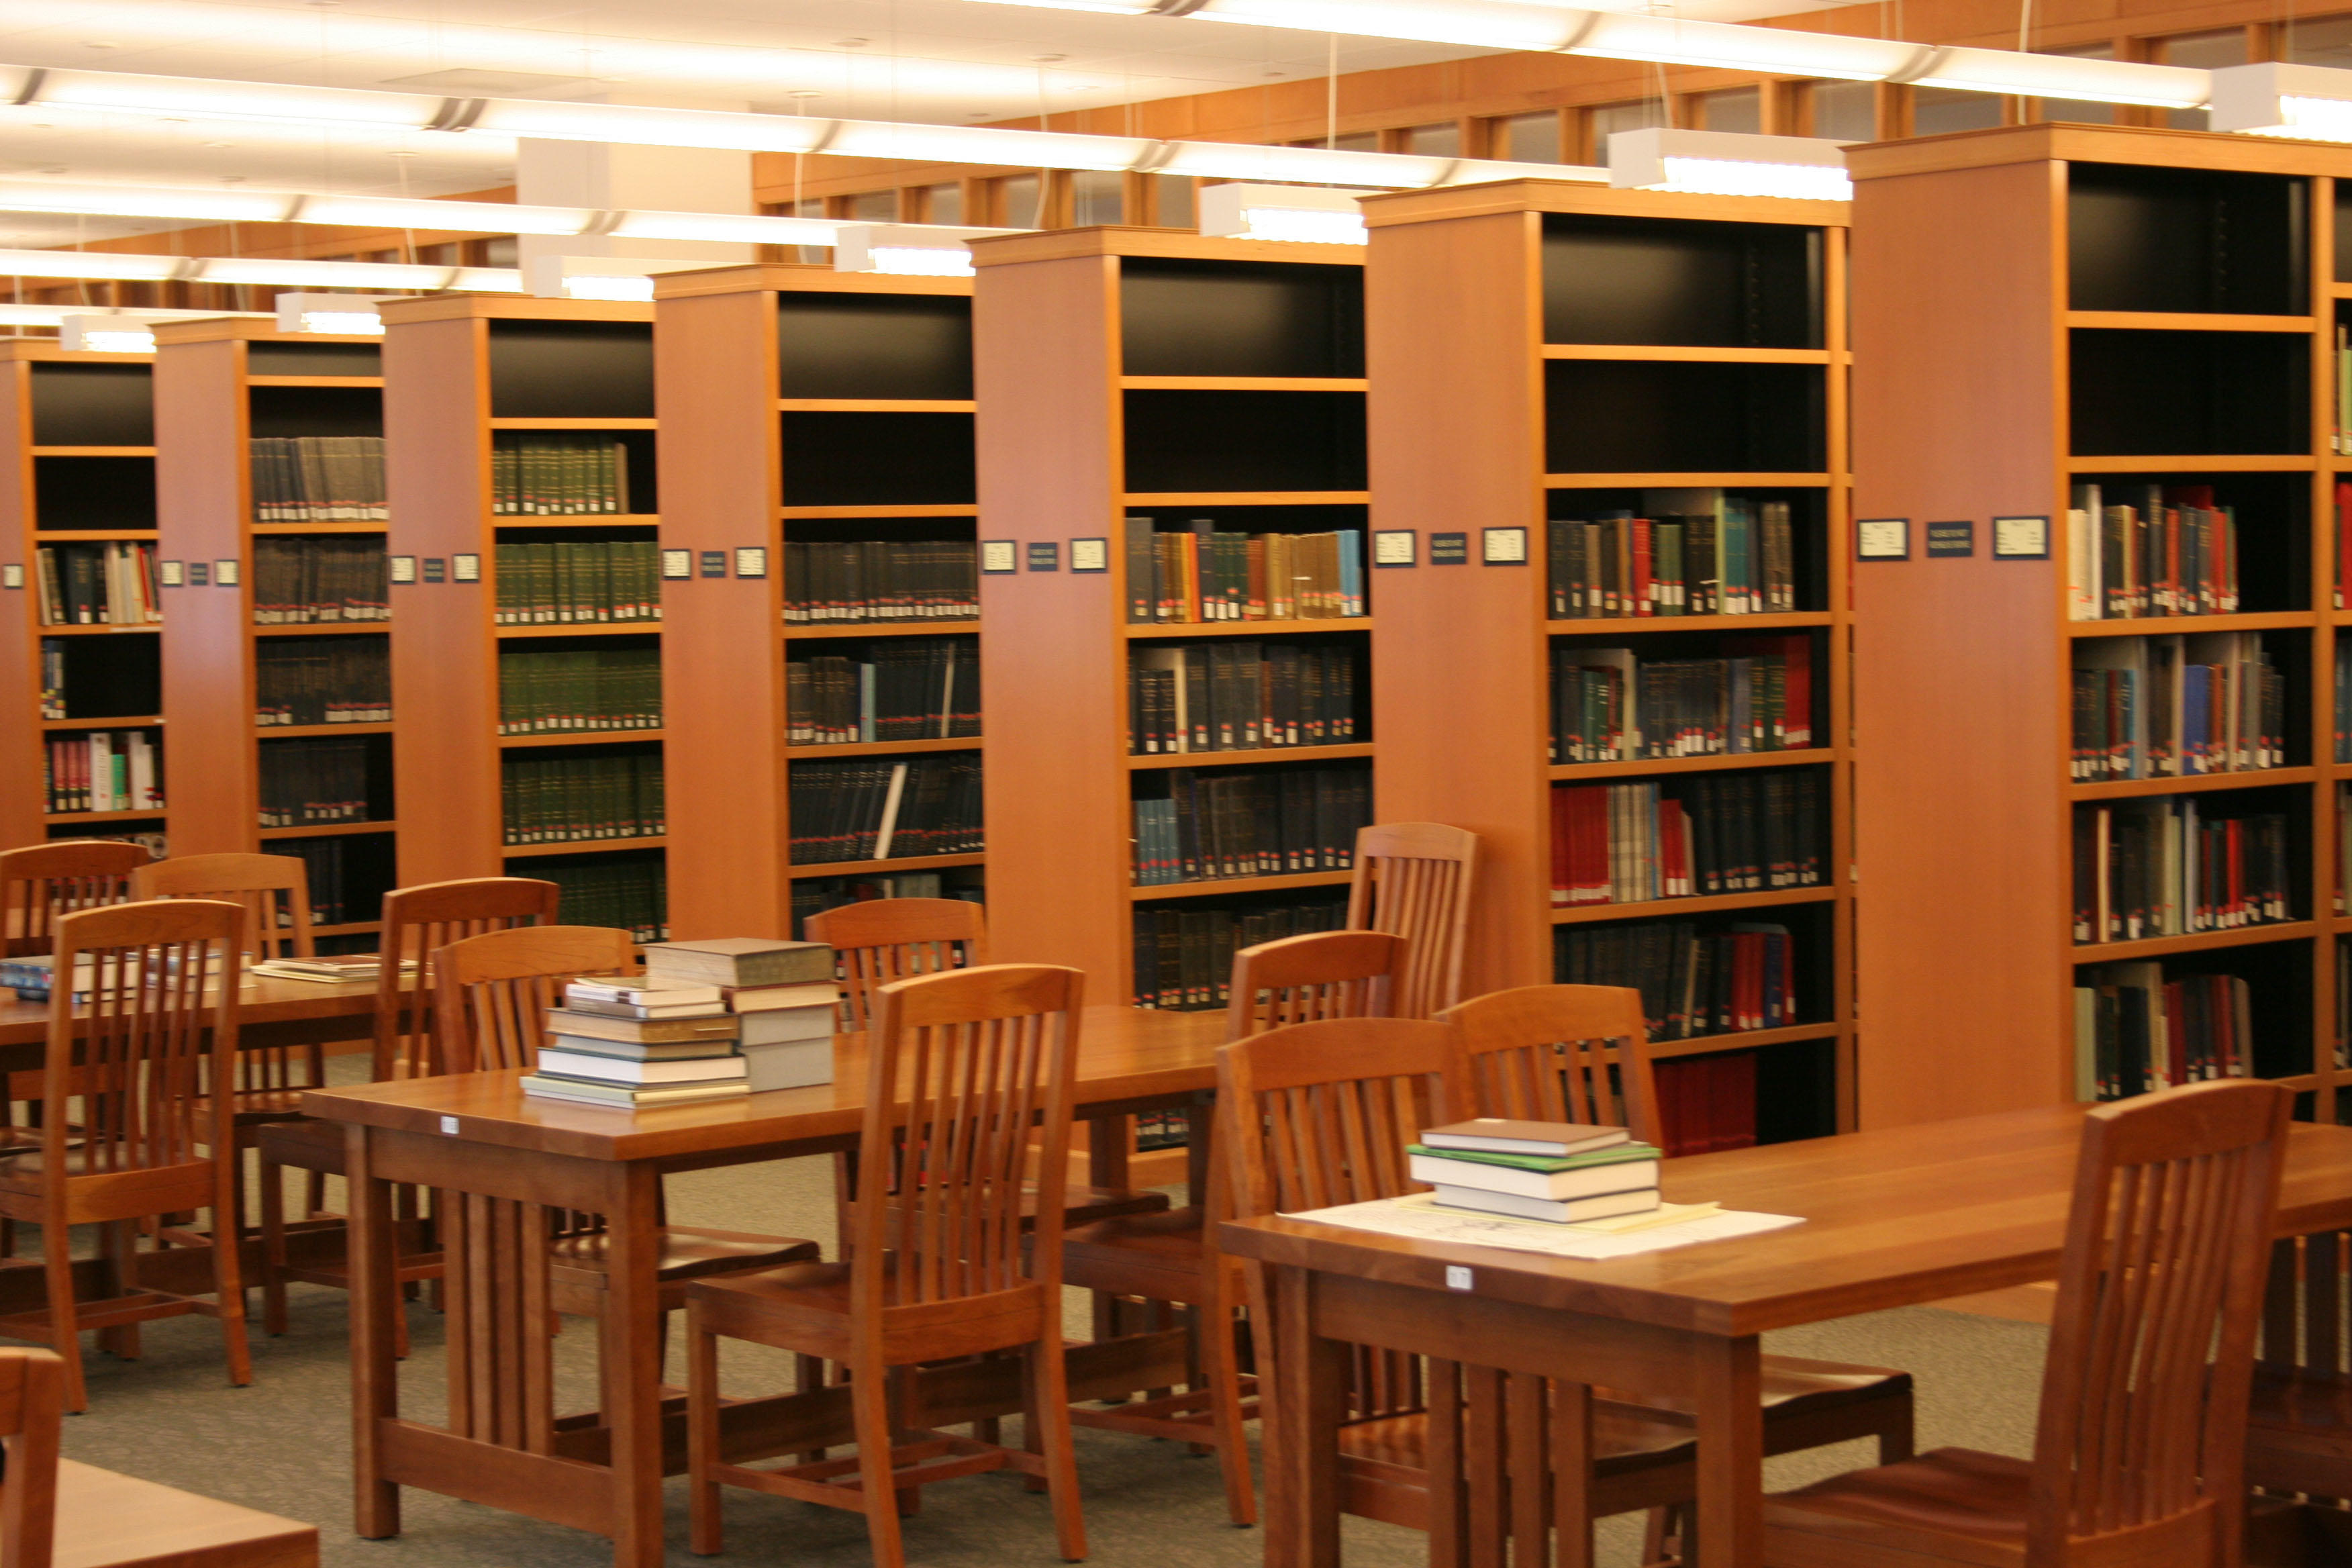 Library shelving and storage